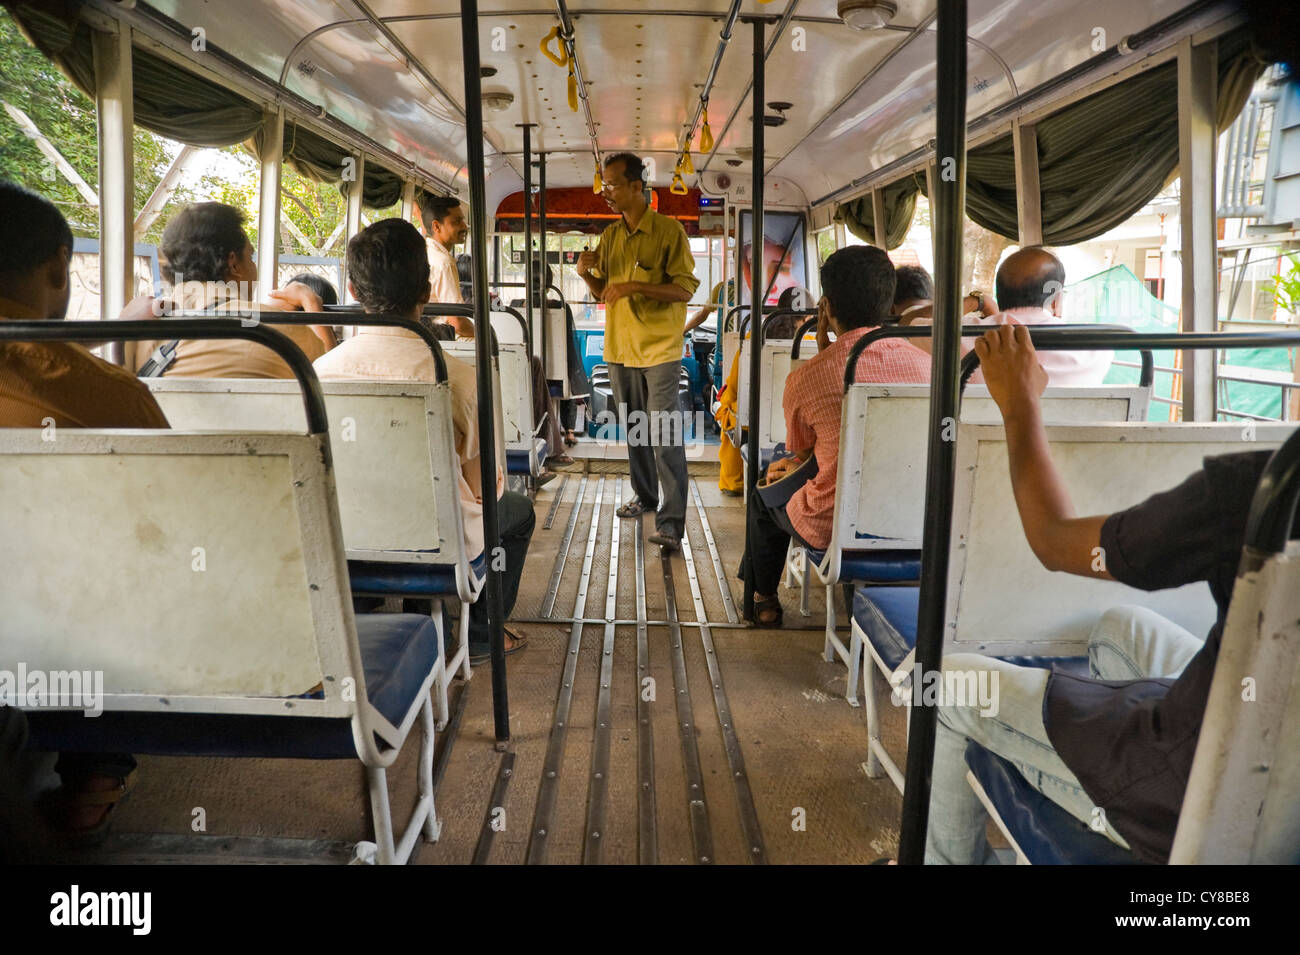 Horizontal interior view of a public bus in Kerala with a conductor collecting fares. Stock Photo